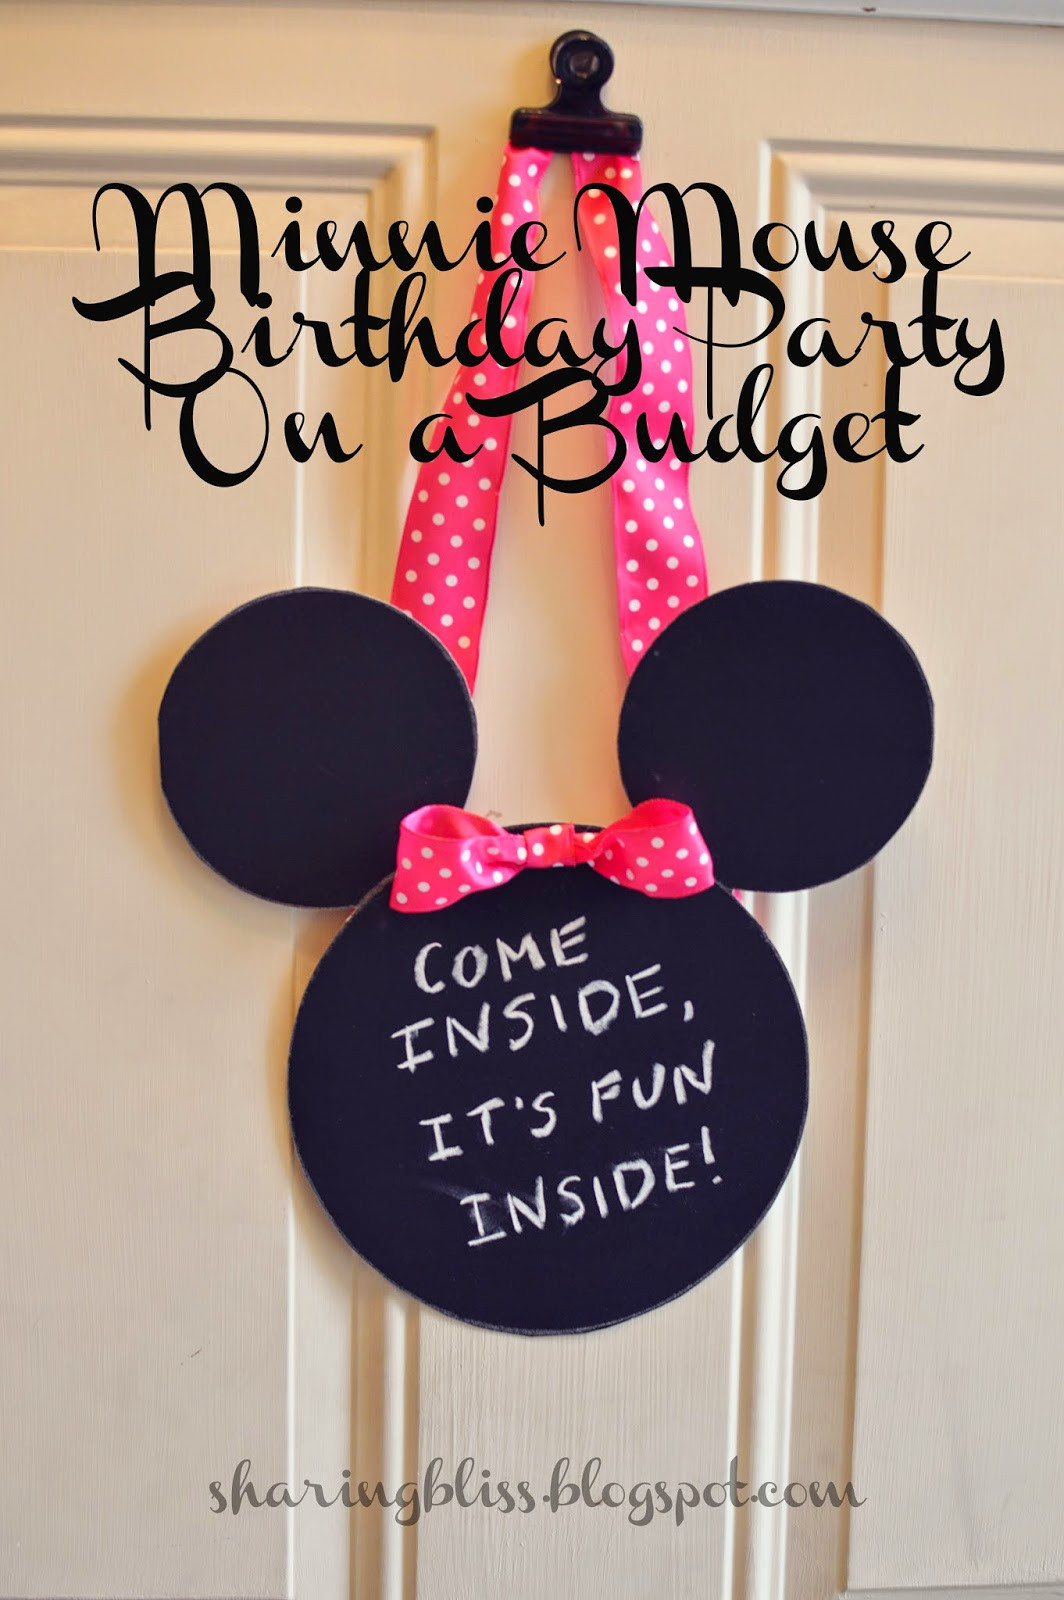 Minnie Mouse Birthday Decorations
 Minnie Mouse Birthday Party on a Bud